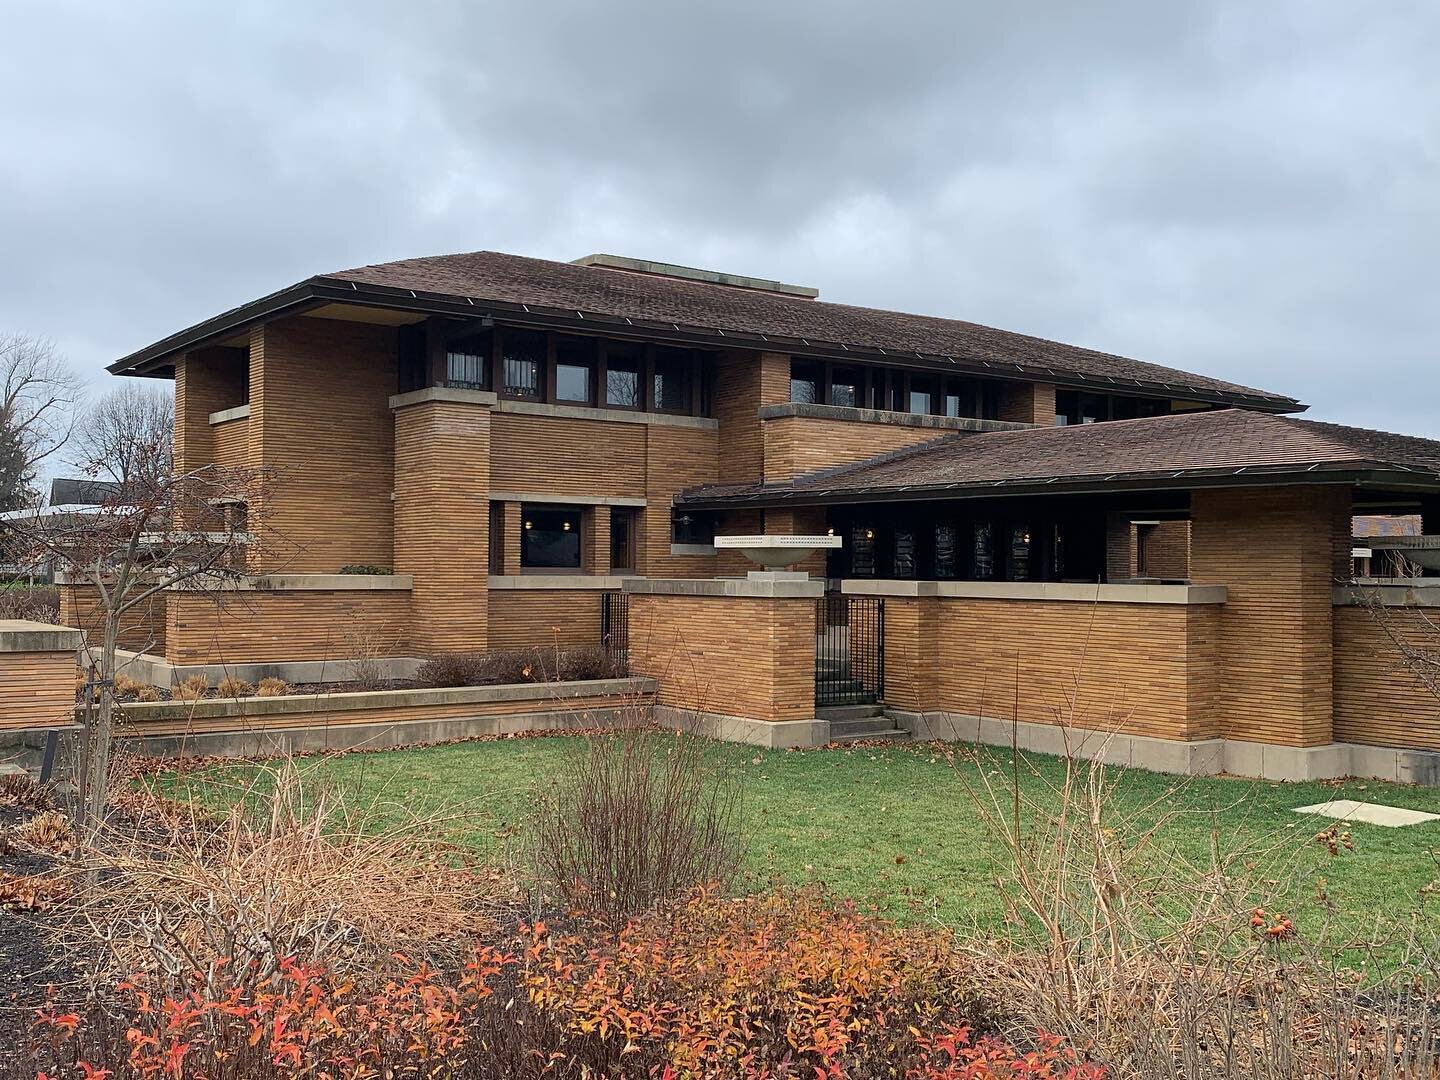 Hey folks were back in the shop regular hours Thursday, Friday and Saturday 11 to 5 and by appointment. Here&rsquo;s some shots from a couple weeks ago at the amazing Frank Lloyd Wright Martin House in Buffalo. Unfortunately, they wouldn&rsquo;t let 